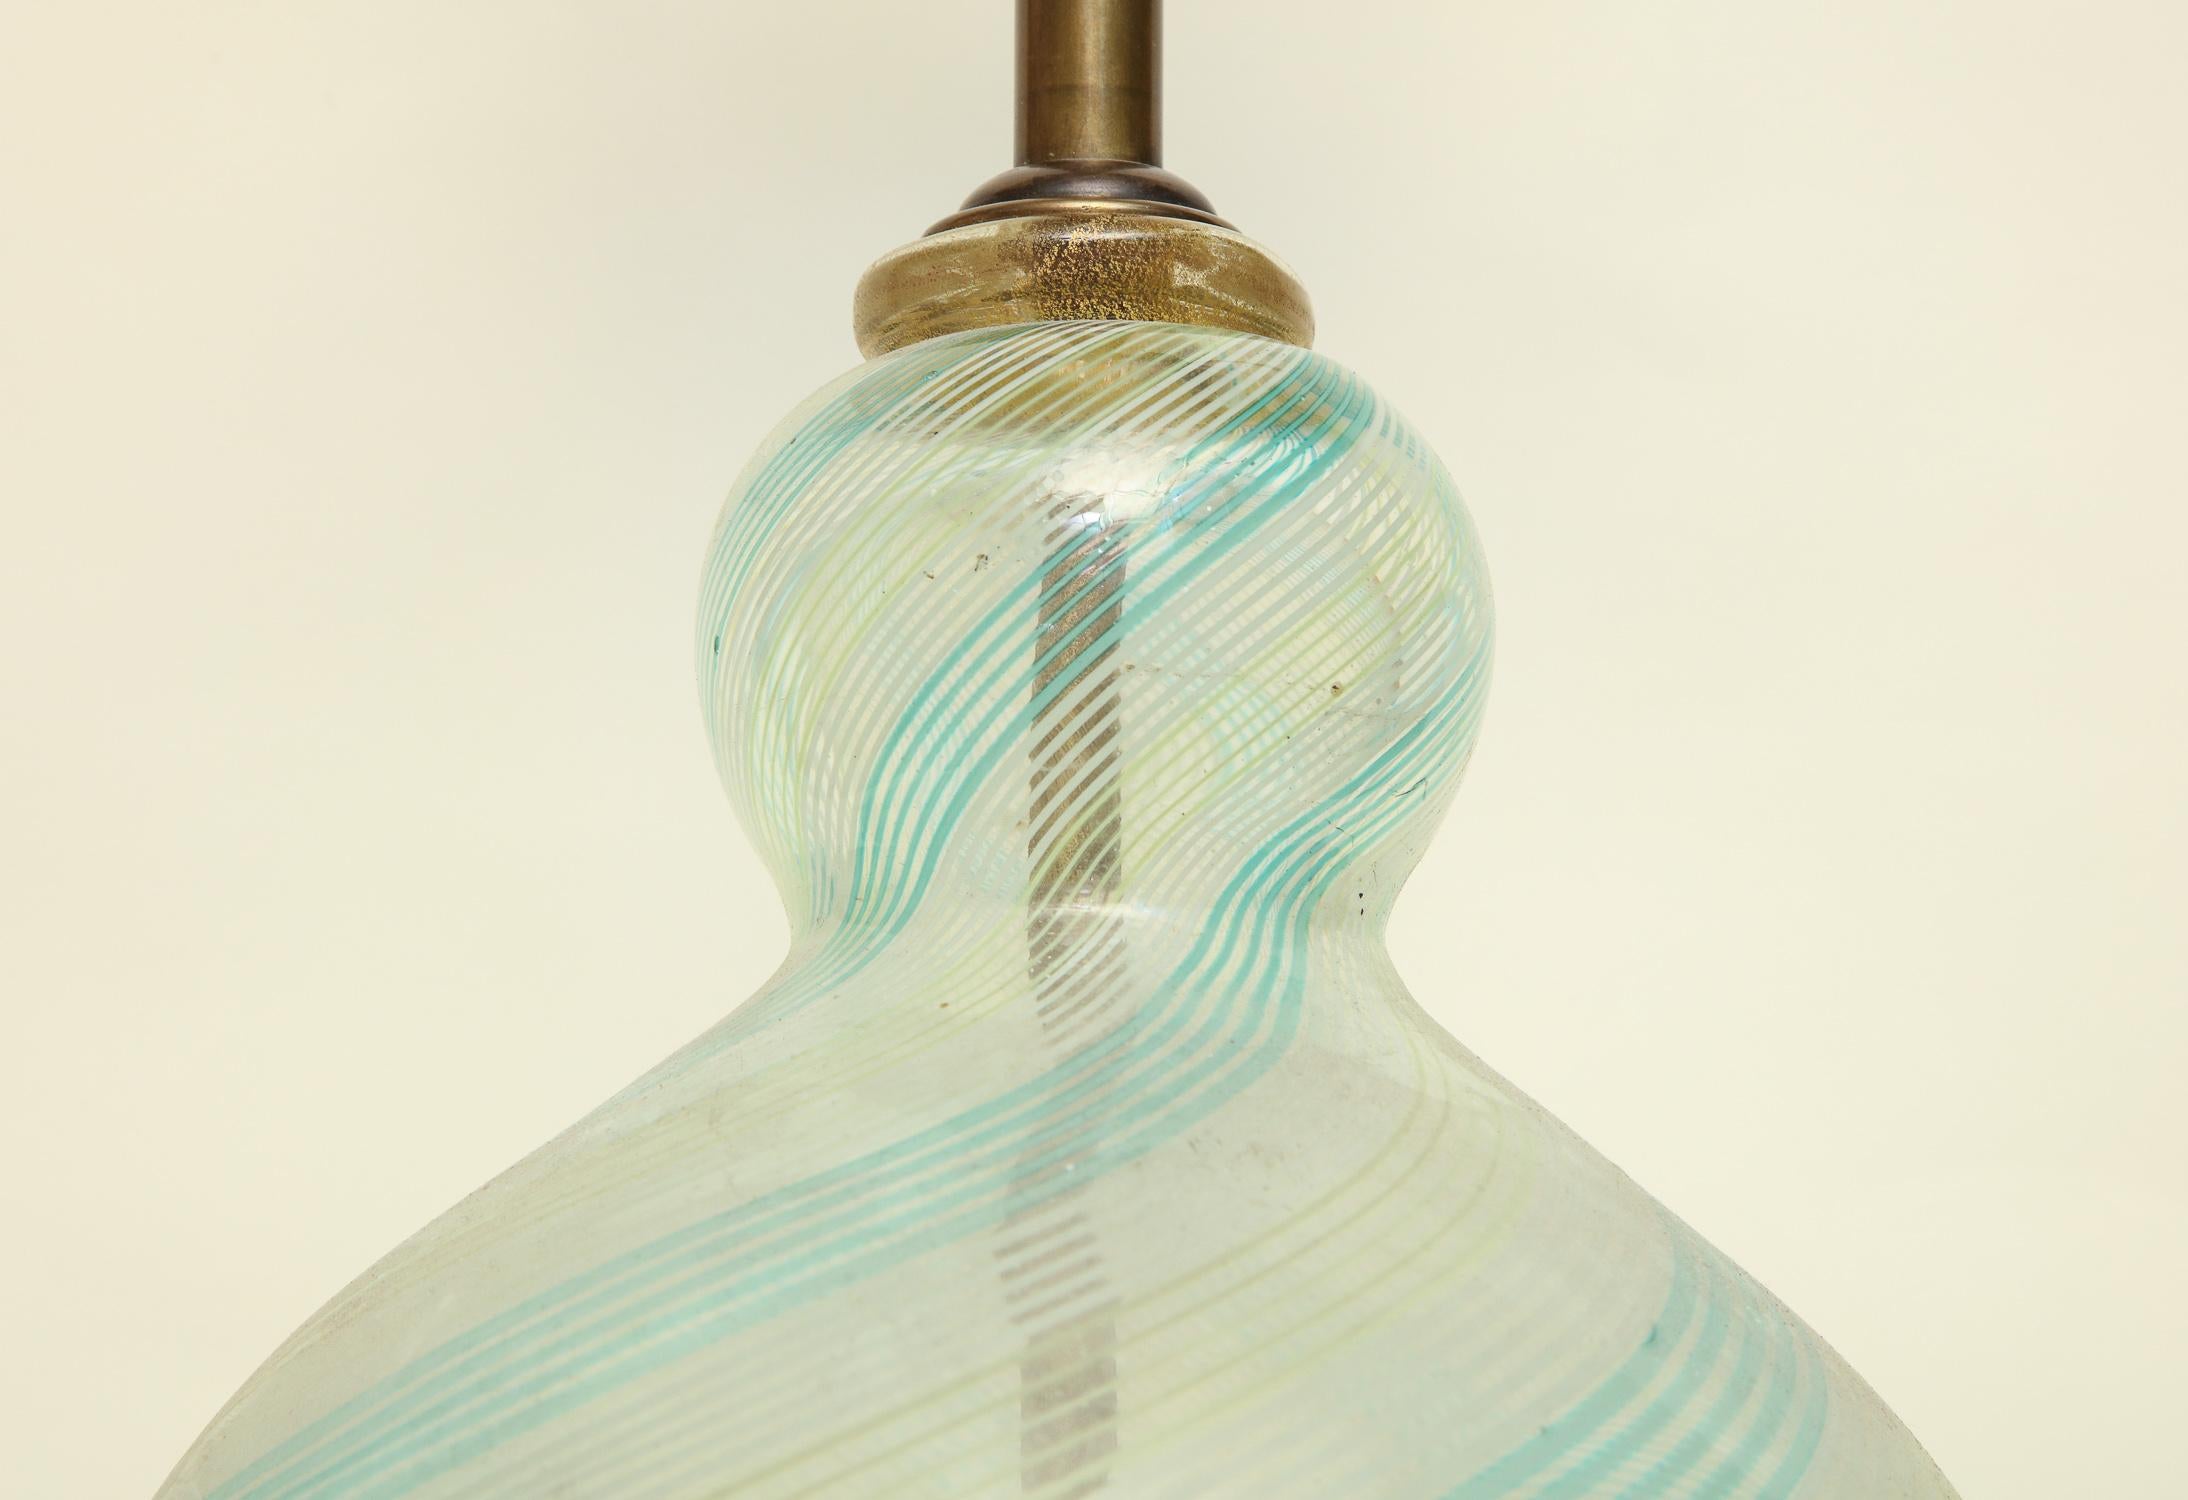 Mid-20th Century Fratelli Toso Table Lamp Murano Art Glass Mid-Century Modern Italy, 1940s For Sale